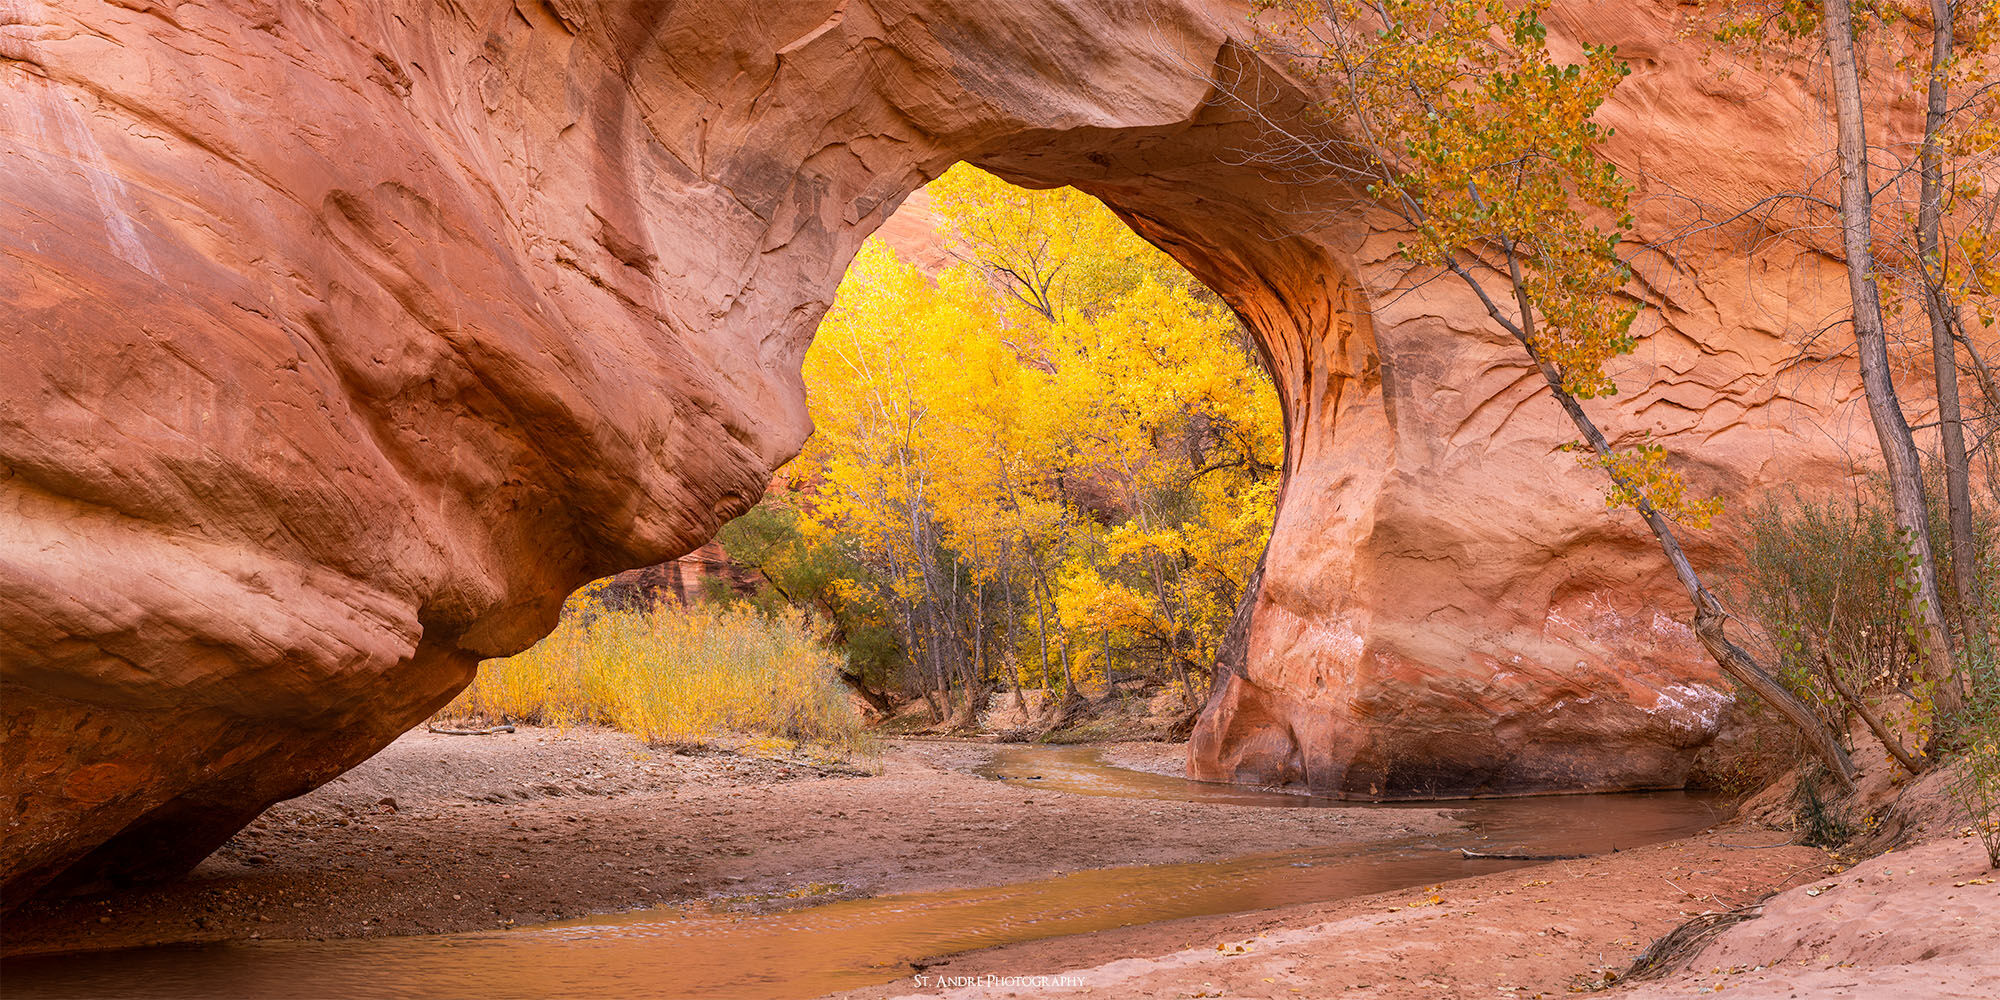 A sandstone natural bridge expands over a small desert stream with fall leaves on trees in are seen through the arch. 